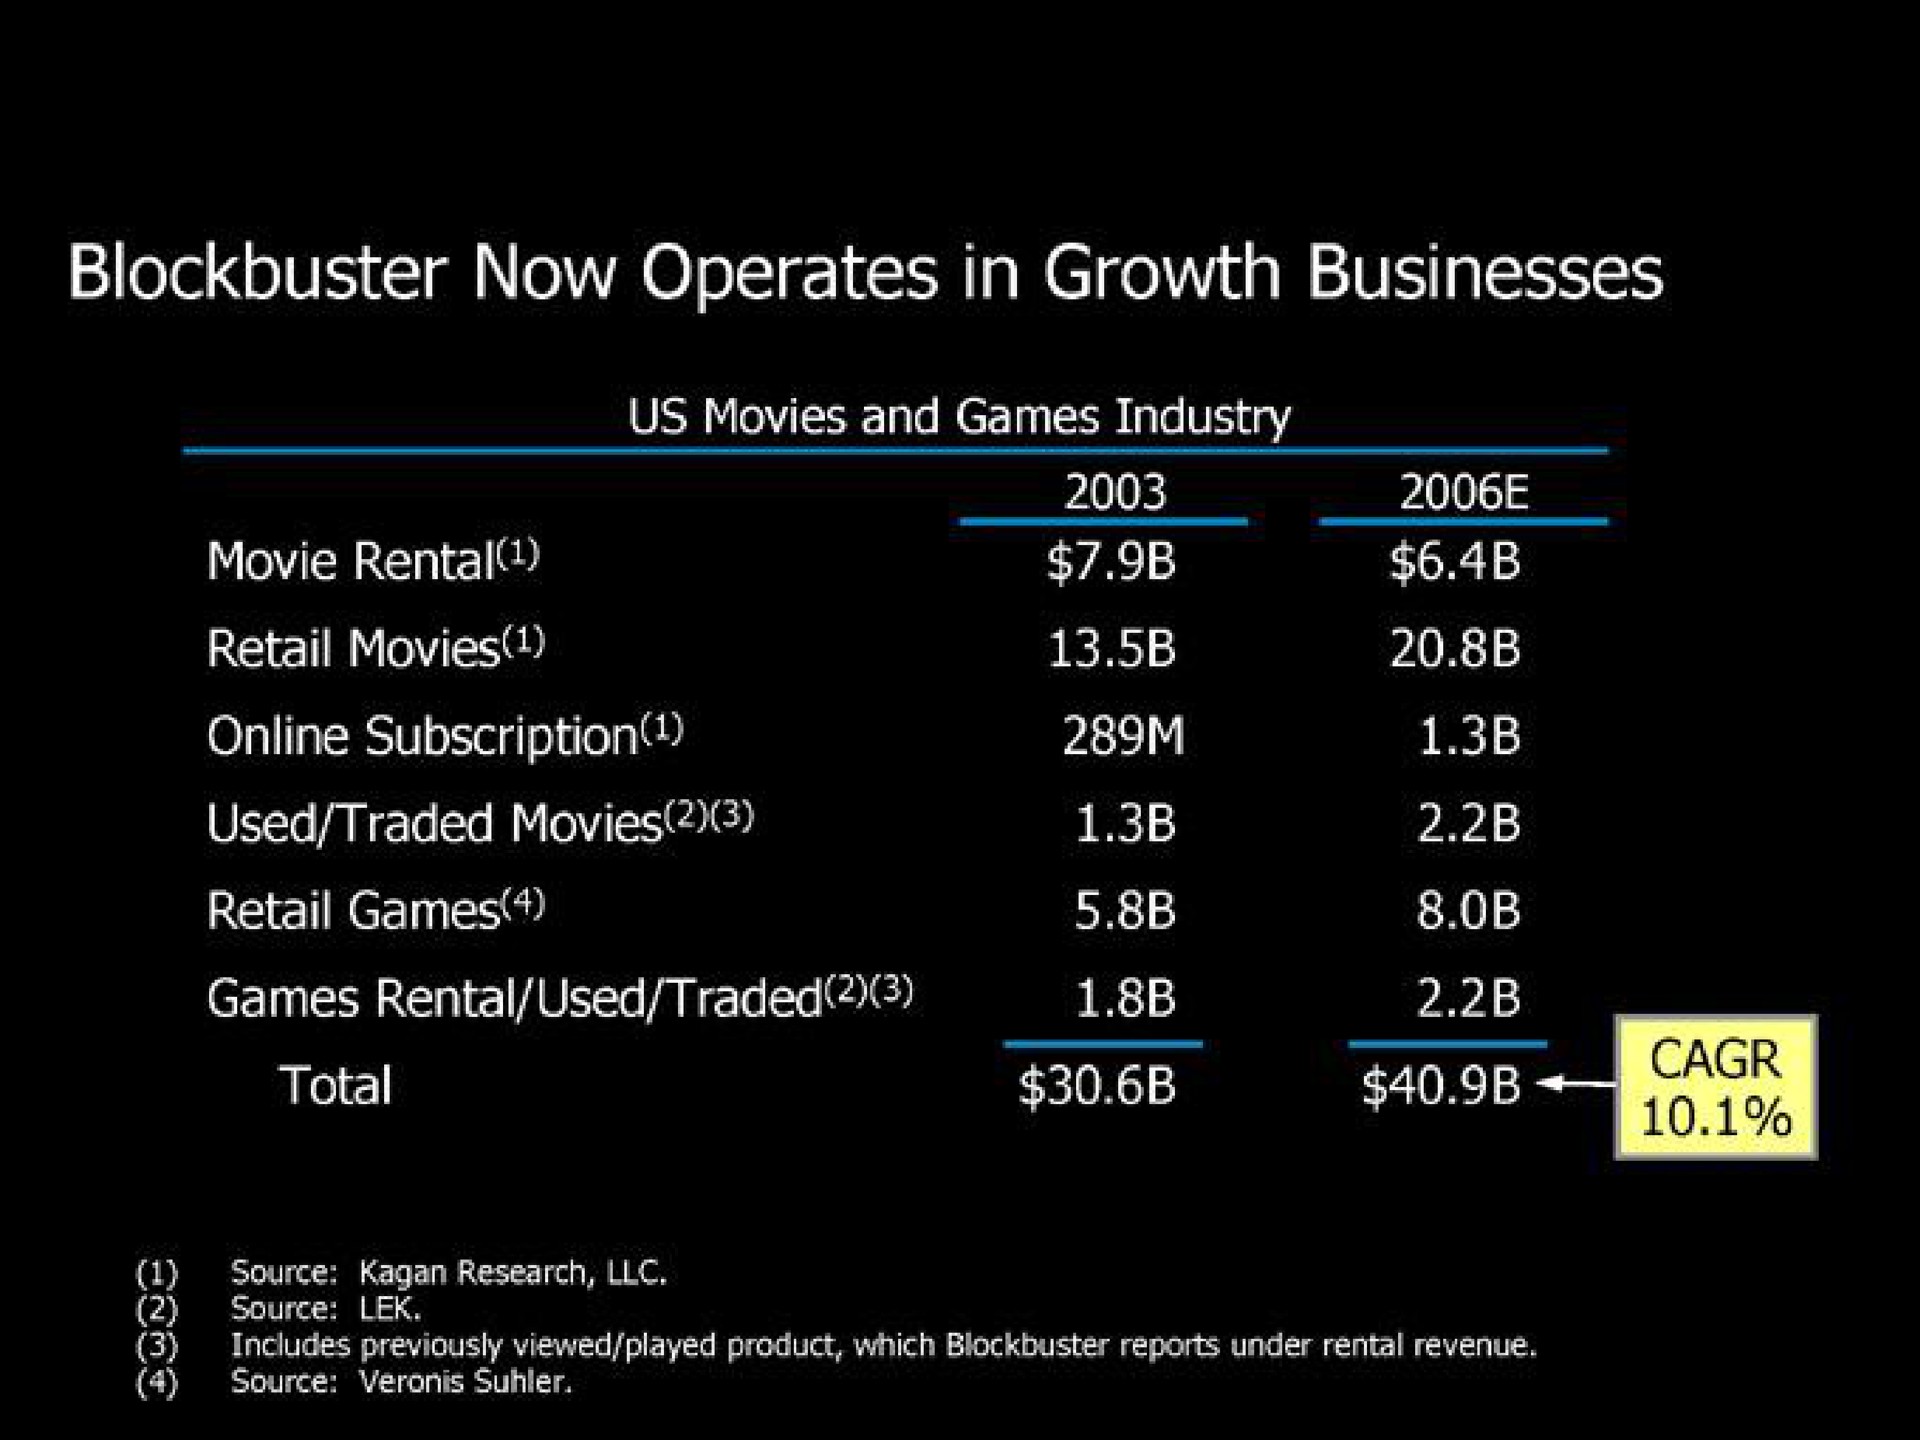 blockbuster now operates in growth businesses | Blockbuster Video